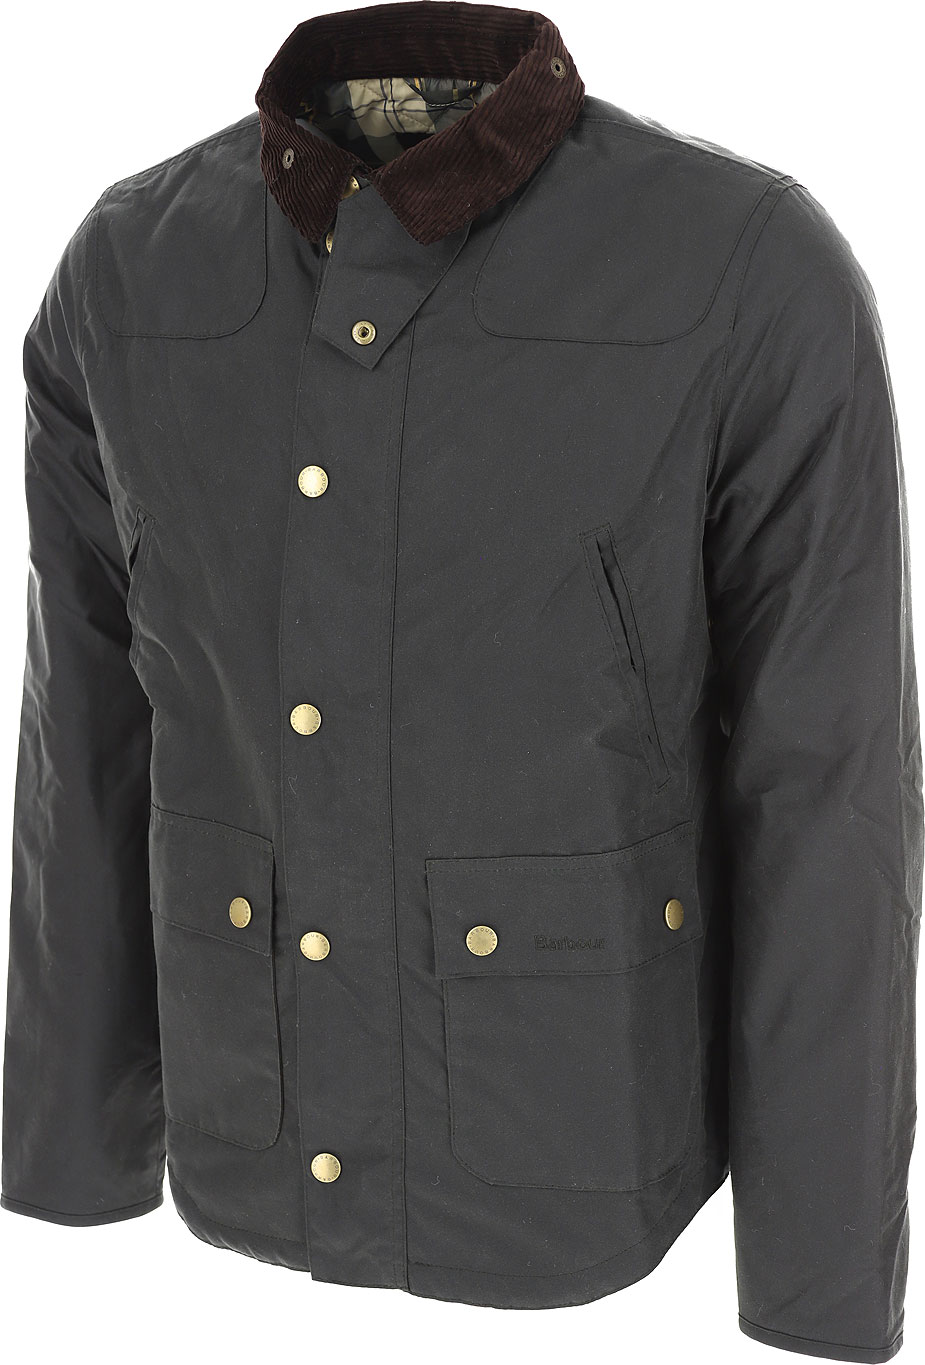 Mens Clothing Barbour, Style code: mwx1106sg51-F199-